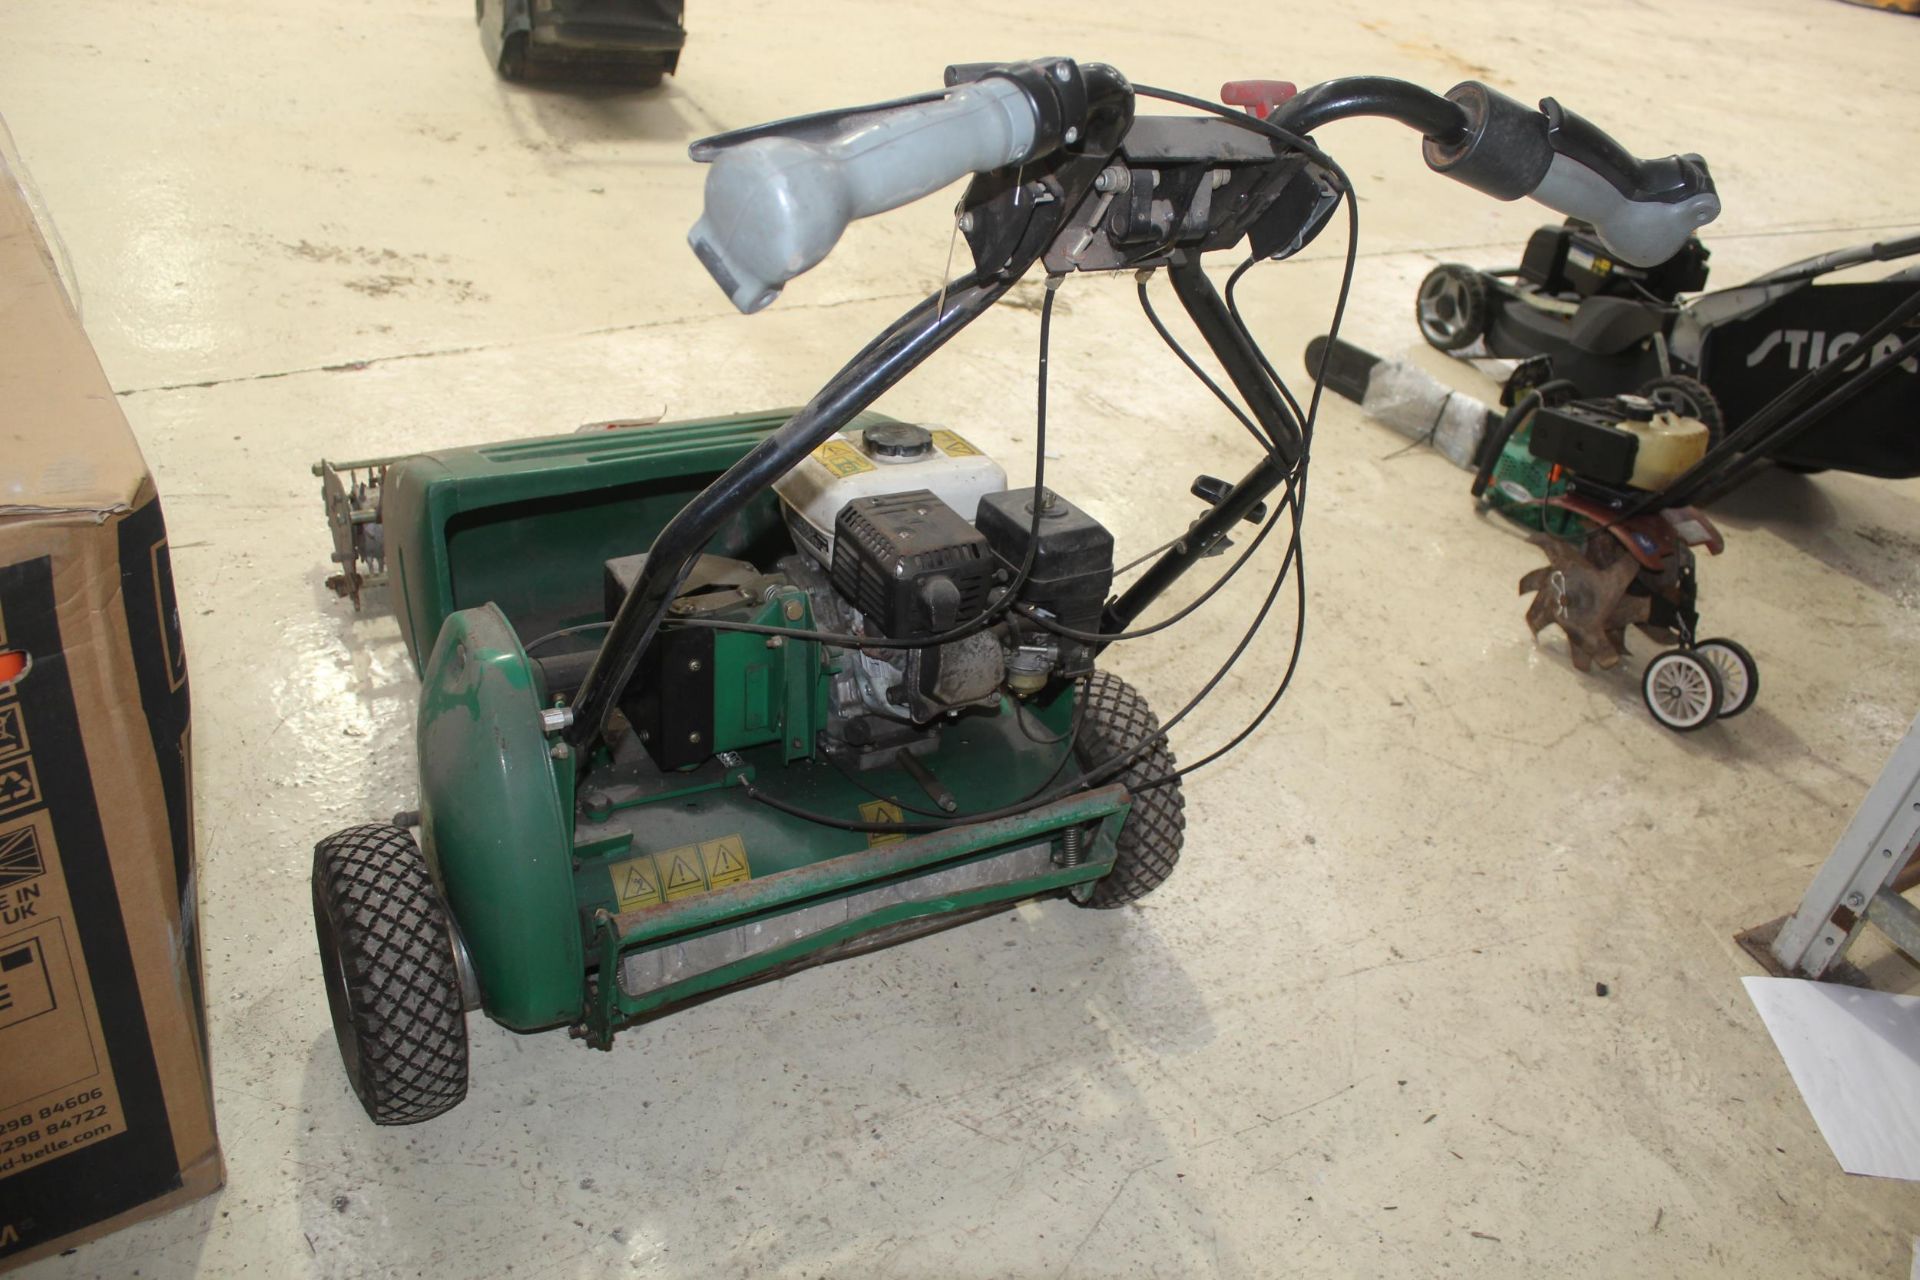 RANSOMES SUPER CERTES 51 MOWER WITH AERATOR ATTACHMENT AND BOX IN WORKING ORDER NO VAT - Image 2 of 4